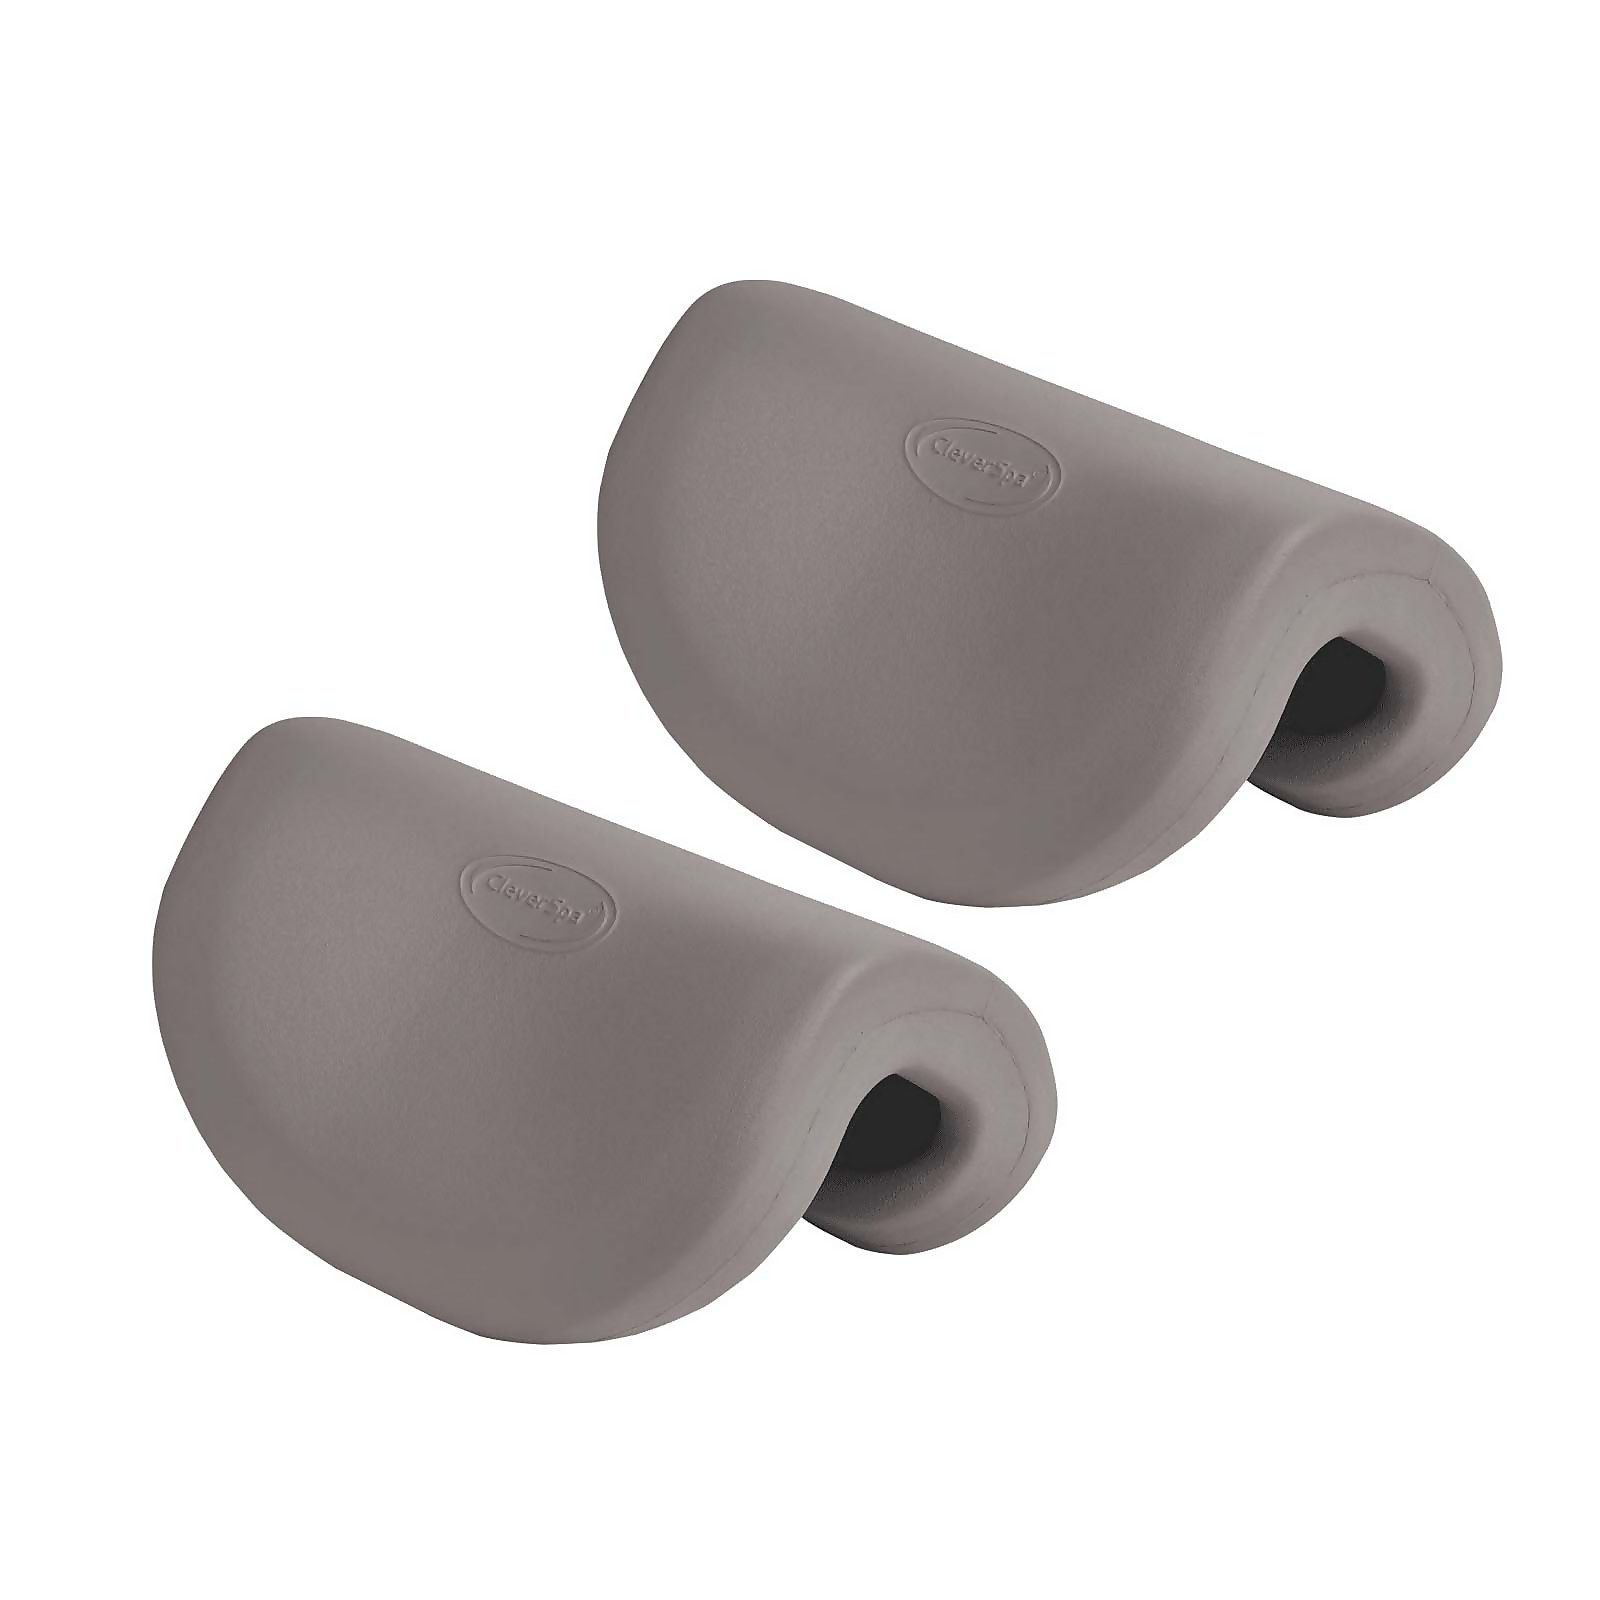 Photo of Cleverspa Universal Drop Stitch Head Rest - 2 Pack